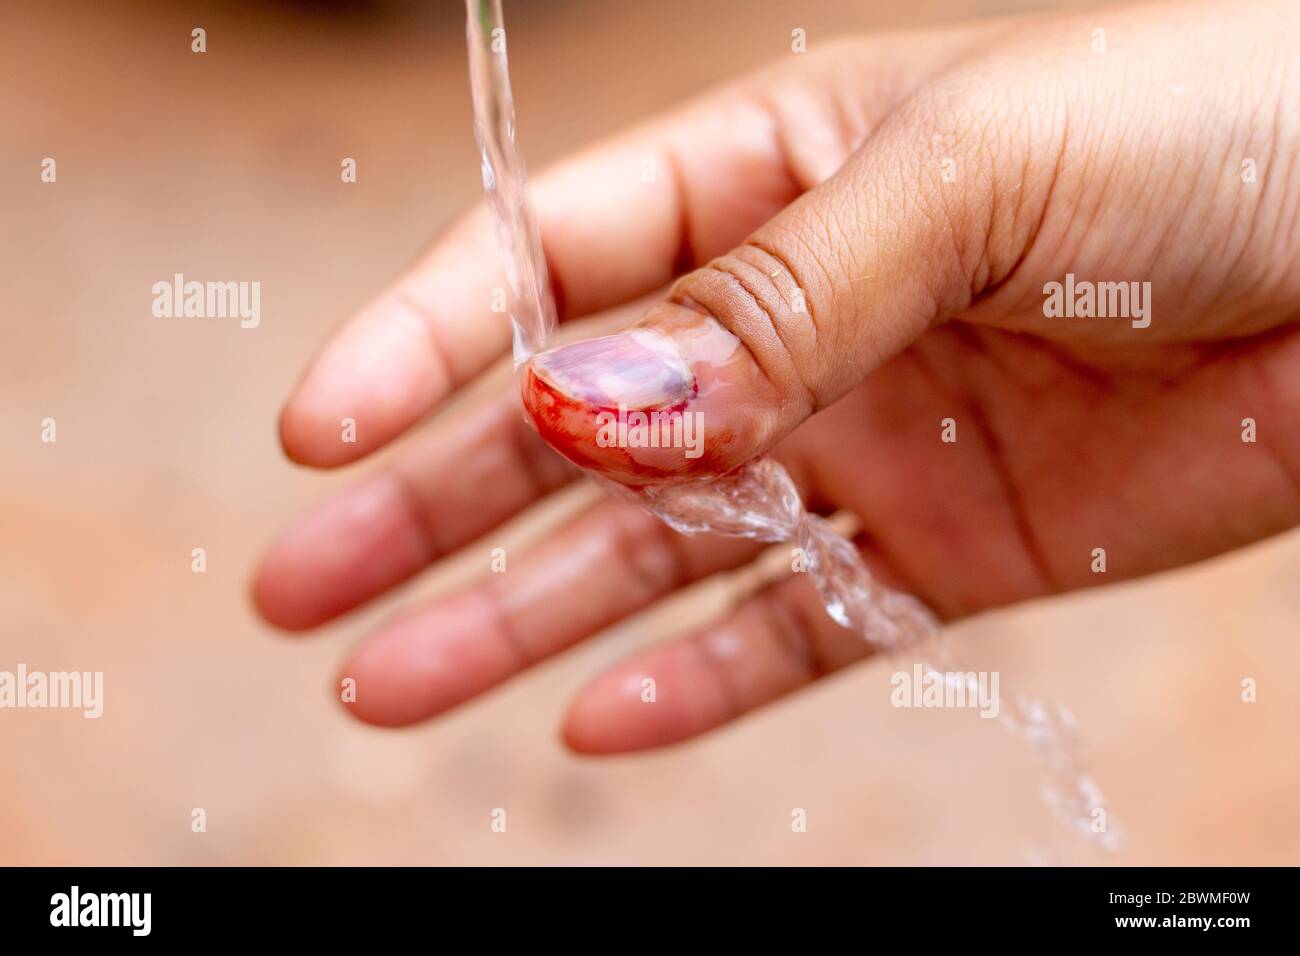 The saline solution is poured over the human finger with black nails, bruised with blood. Stock Photo